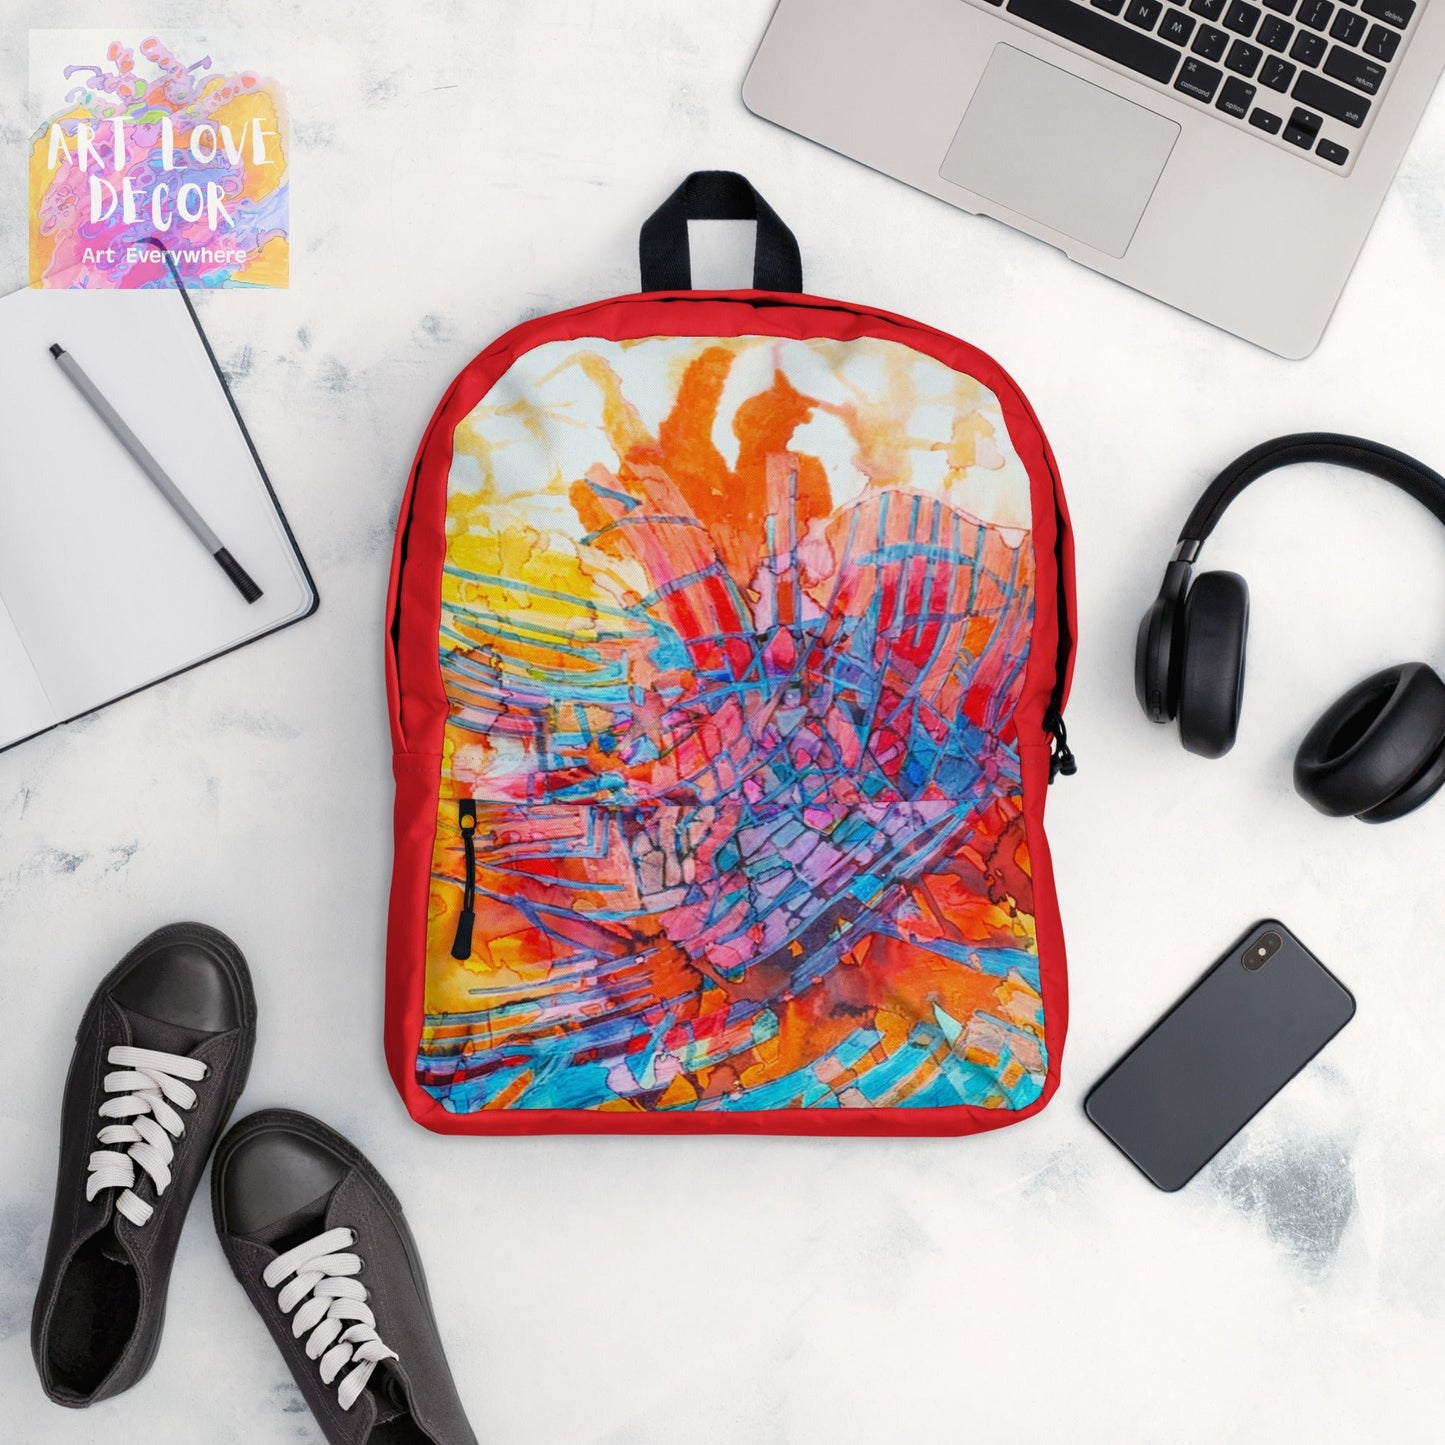 Fire Pit Abstract Backpack - Art Love Decor